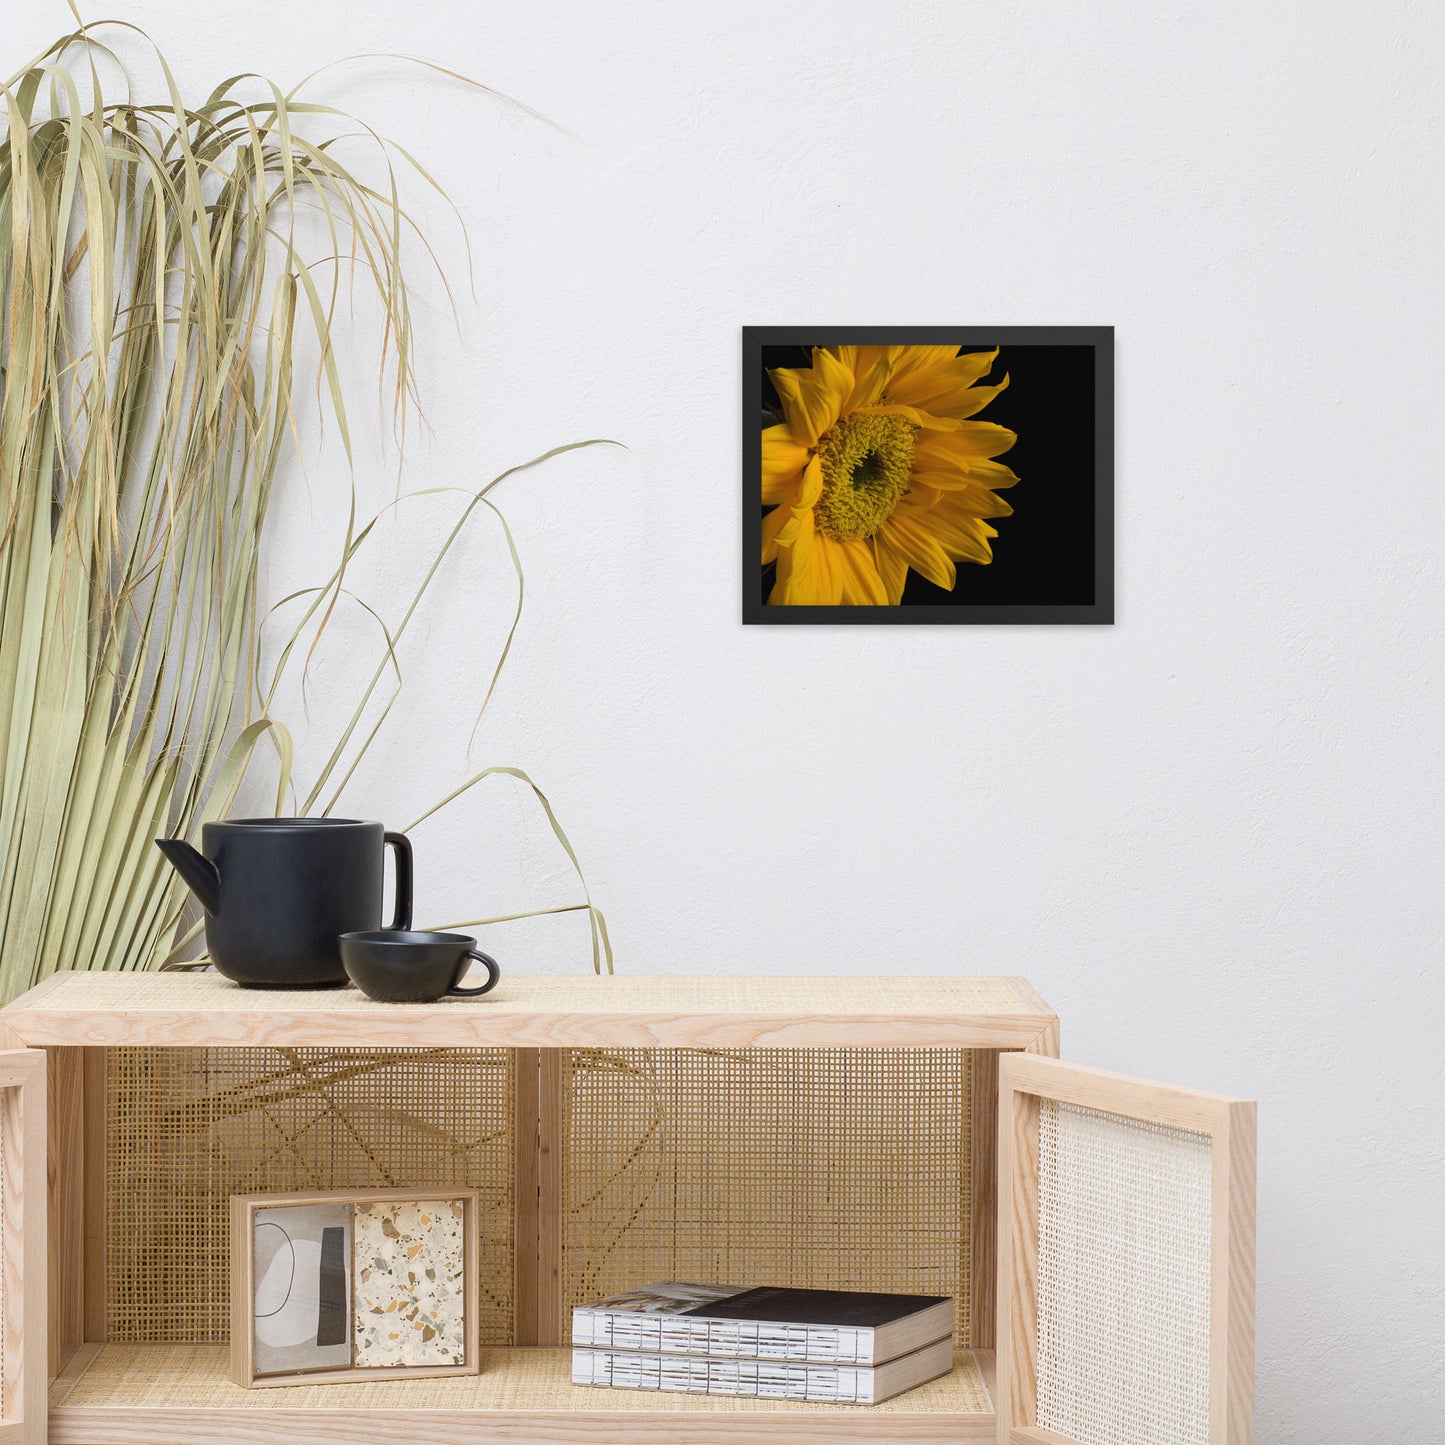 Sunflower from Left Floral Nature Photo Framed Wall Art Print